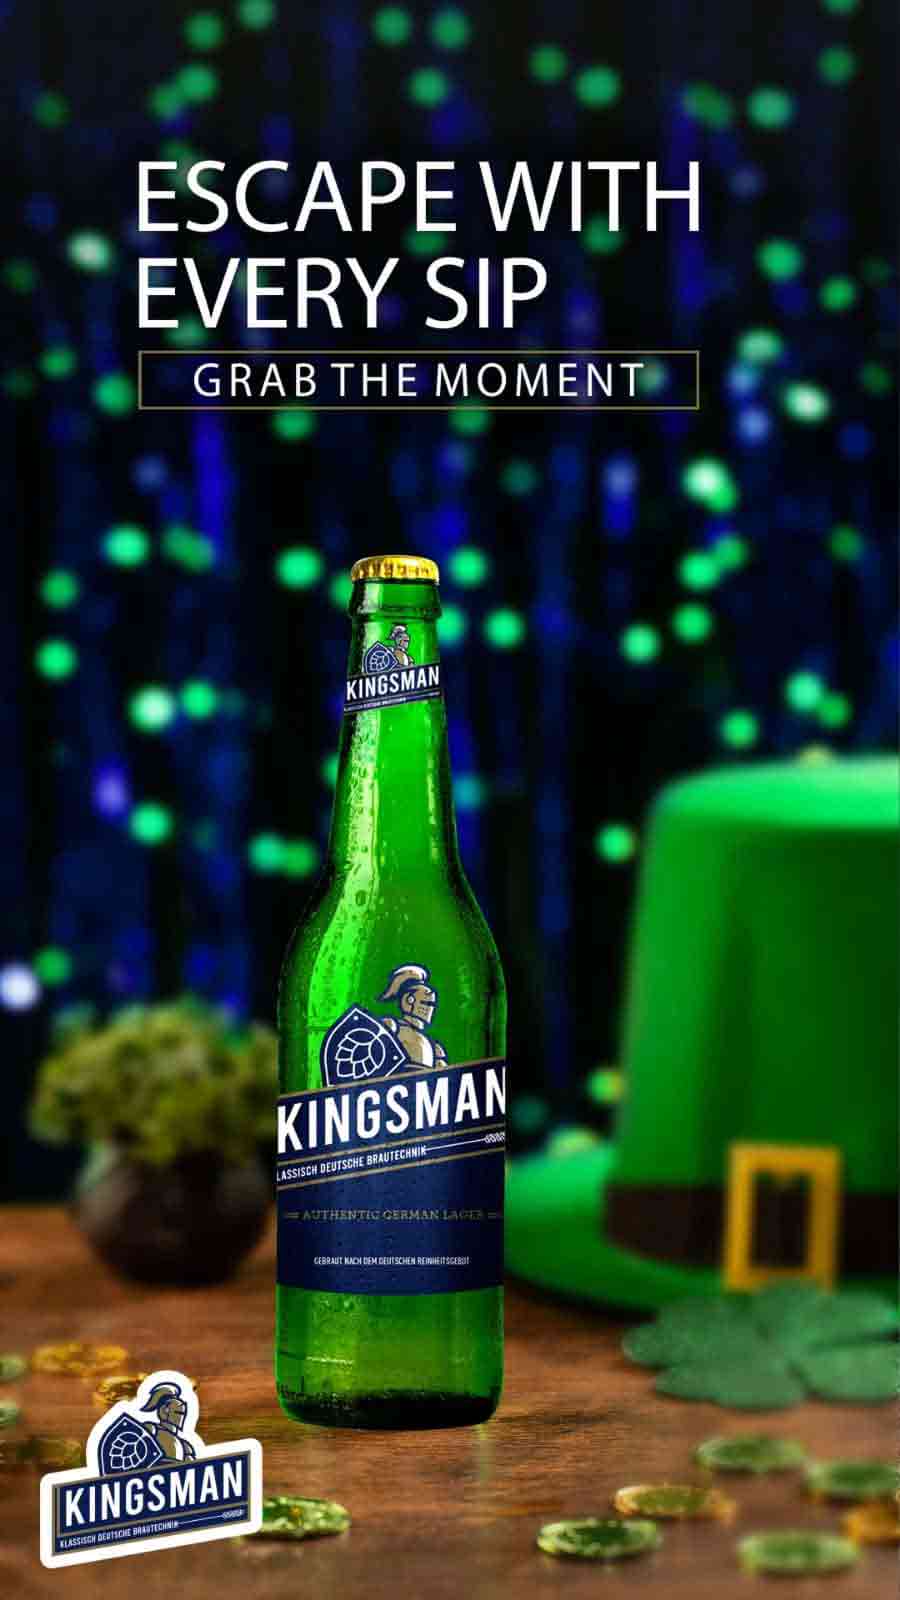 Escape with every sip of Kingsman beer